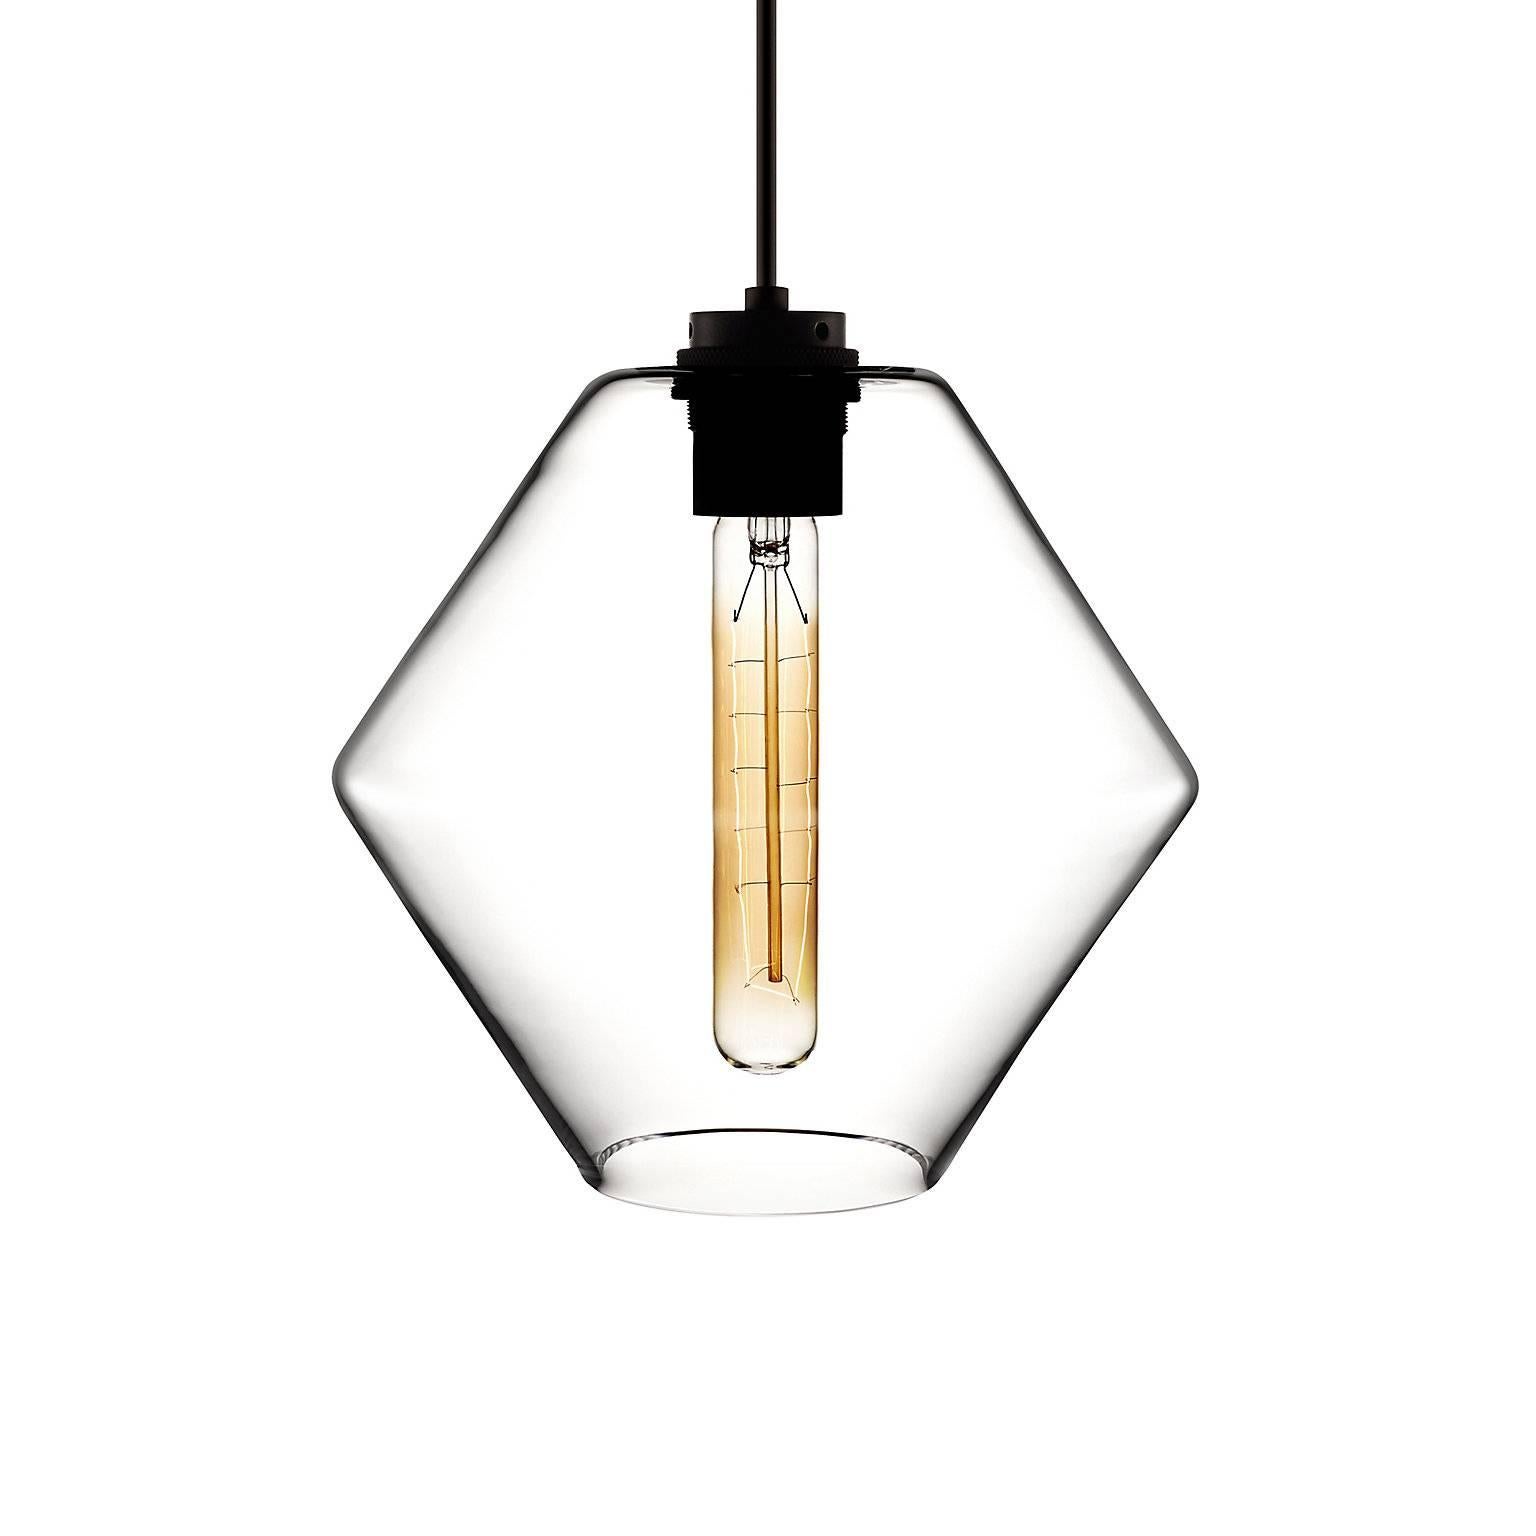 Unique to the Crystalline Series, the Trove pendant light merges defined angles with bold colors. Pairs easily with the Delinea, Axia, and Calla pendants that also comprise the Crystalline Series. Every single glass pendant light that comes from